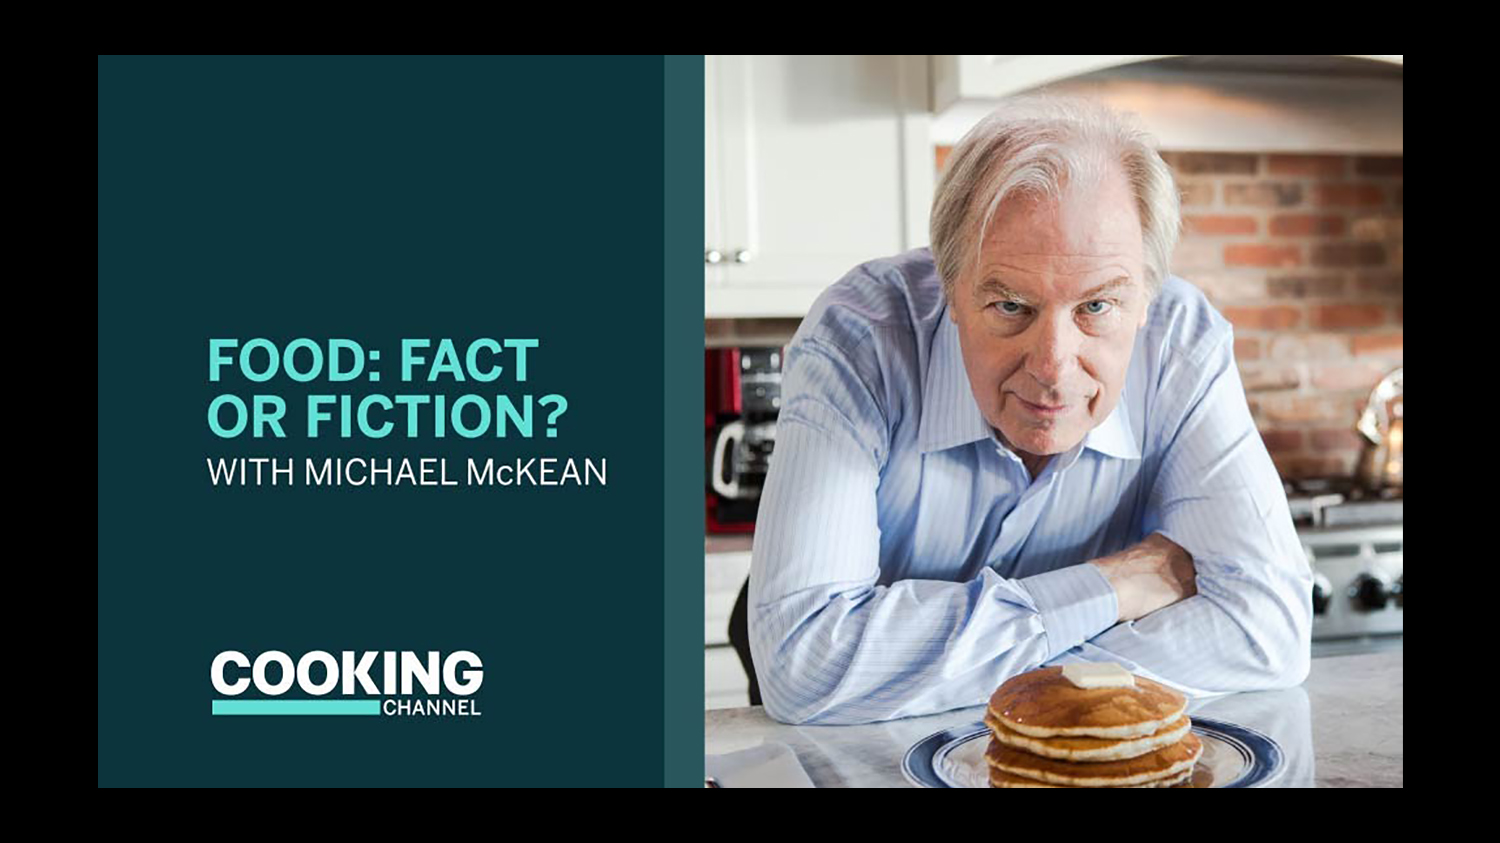 Факт фуд. Fact or Fiction. Found in fact food.